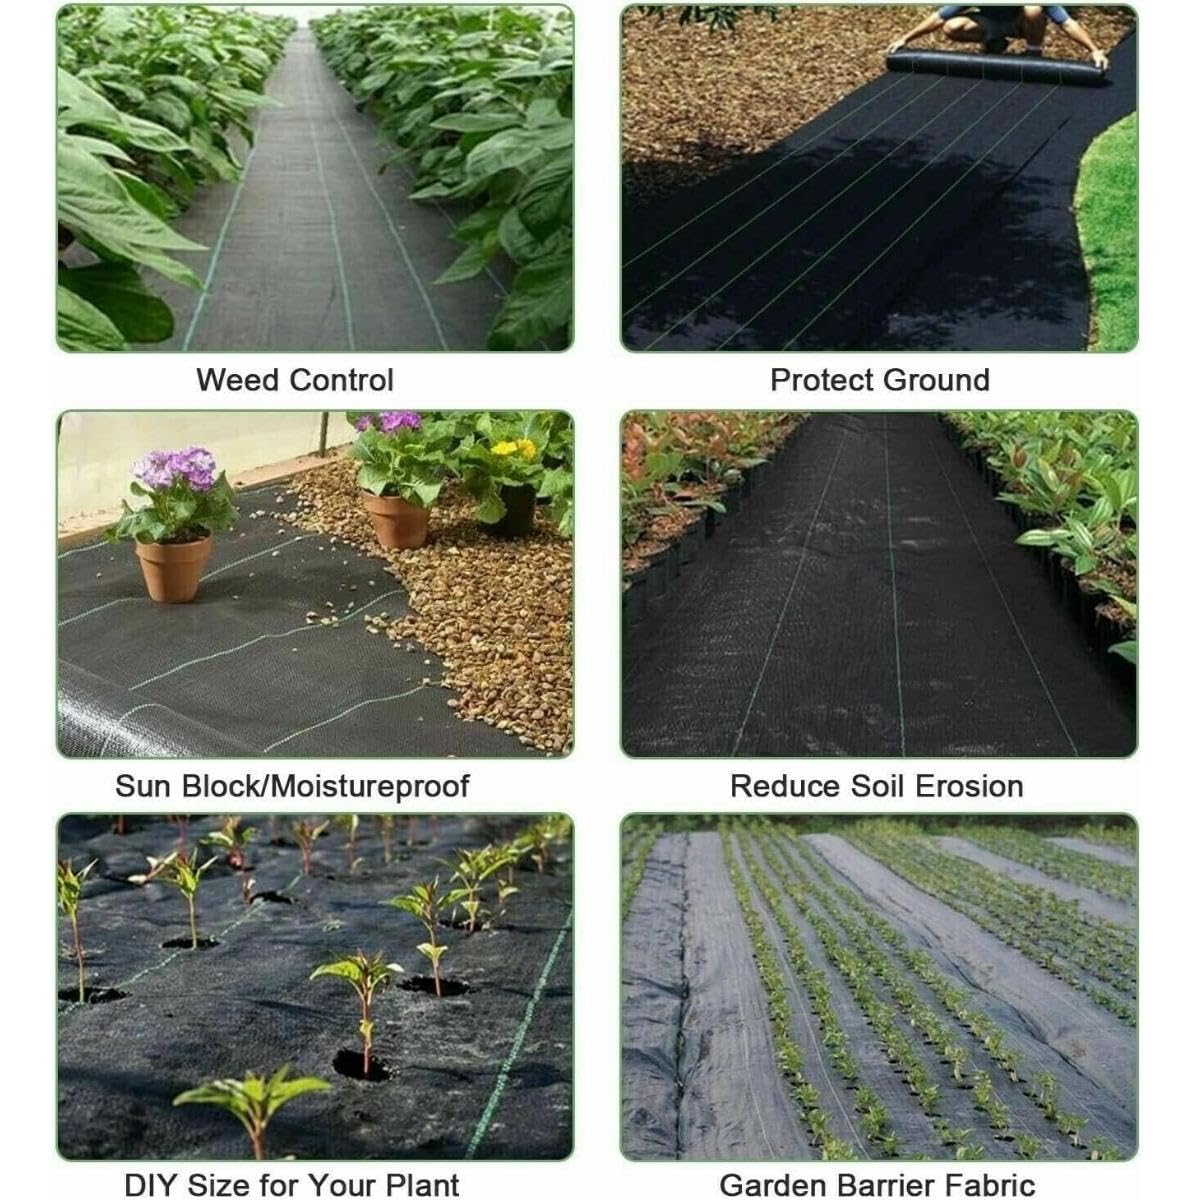 Singhal Premium Garden Weed Control Barrier Sheet Mat 2 x 20 Mtr, Landscape Fabric 90 GSM Heavy Duty Weed Block Gardening Mat for Gardens, Agriculture, Outdoor Projects (Black) (2x20 Meter)